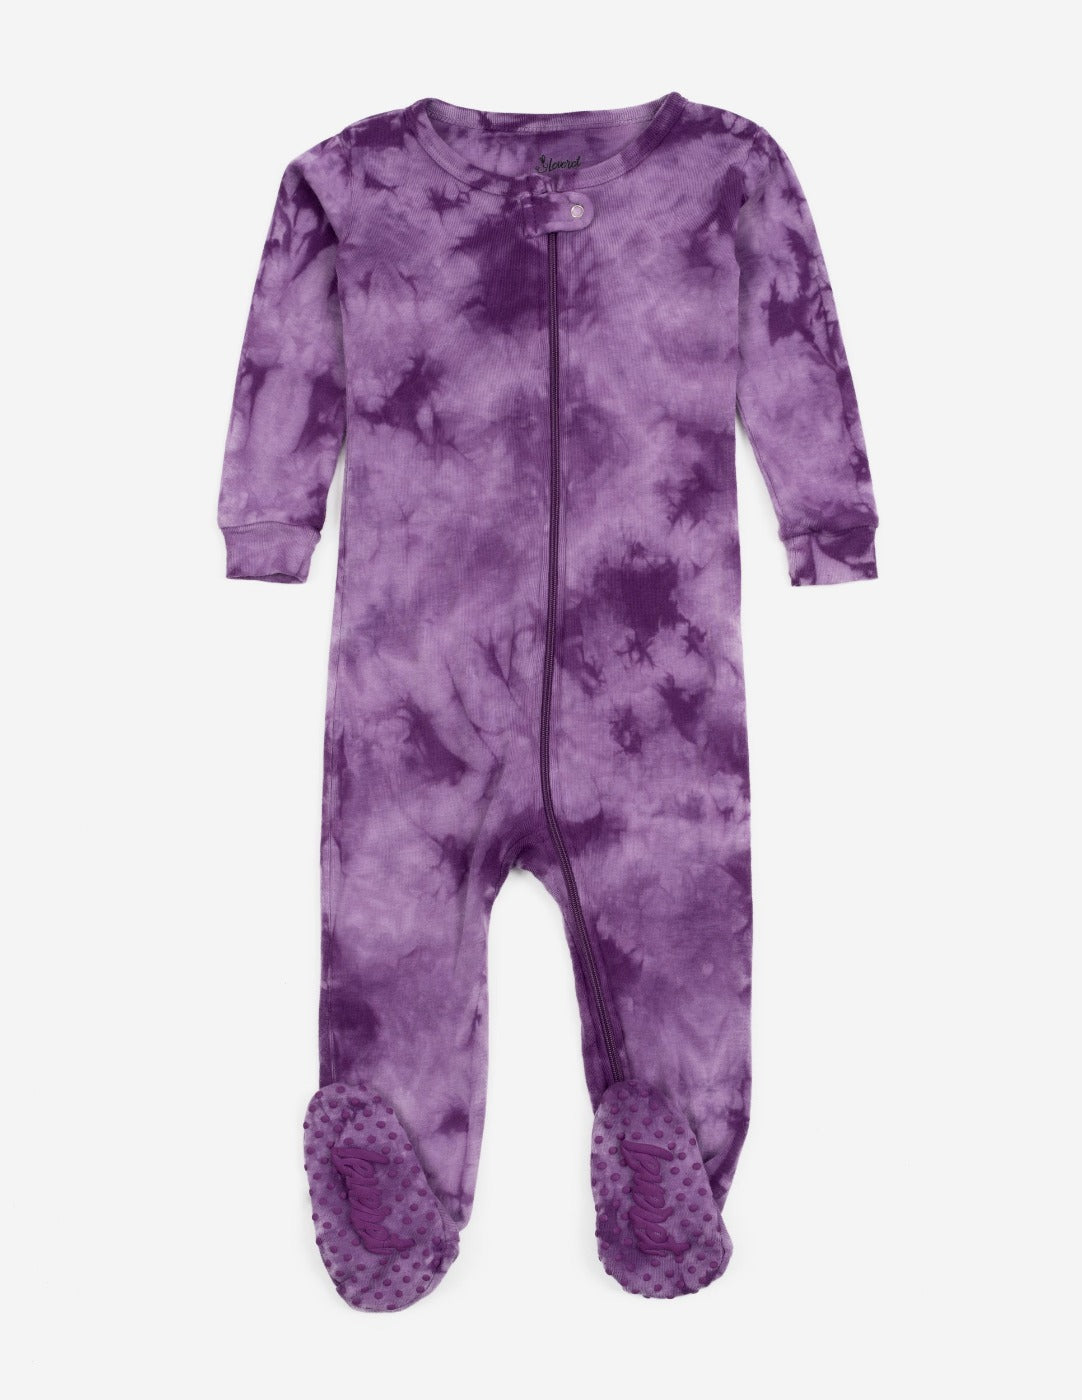 Baby Footed Mix Dye Cotton Pajamas